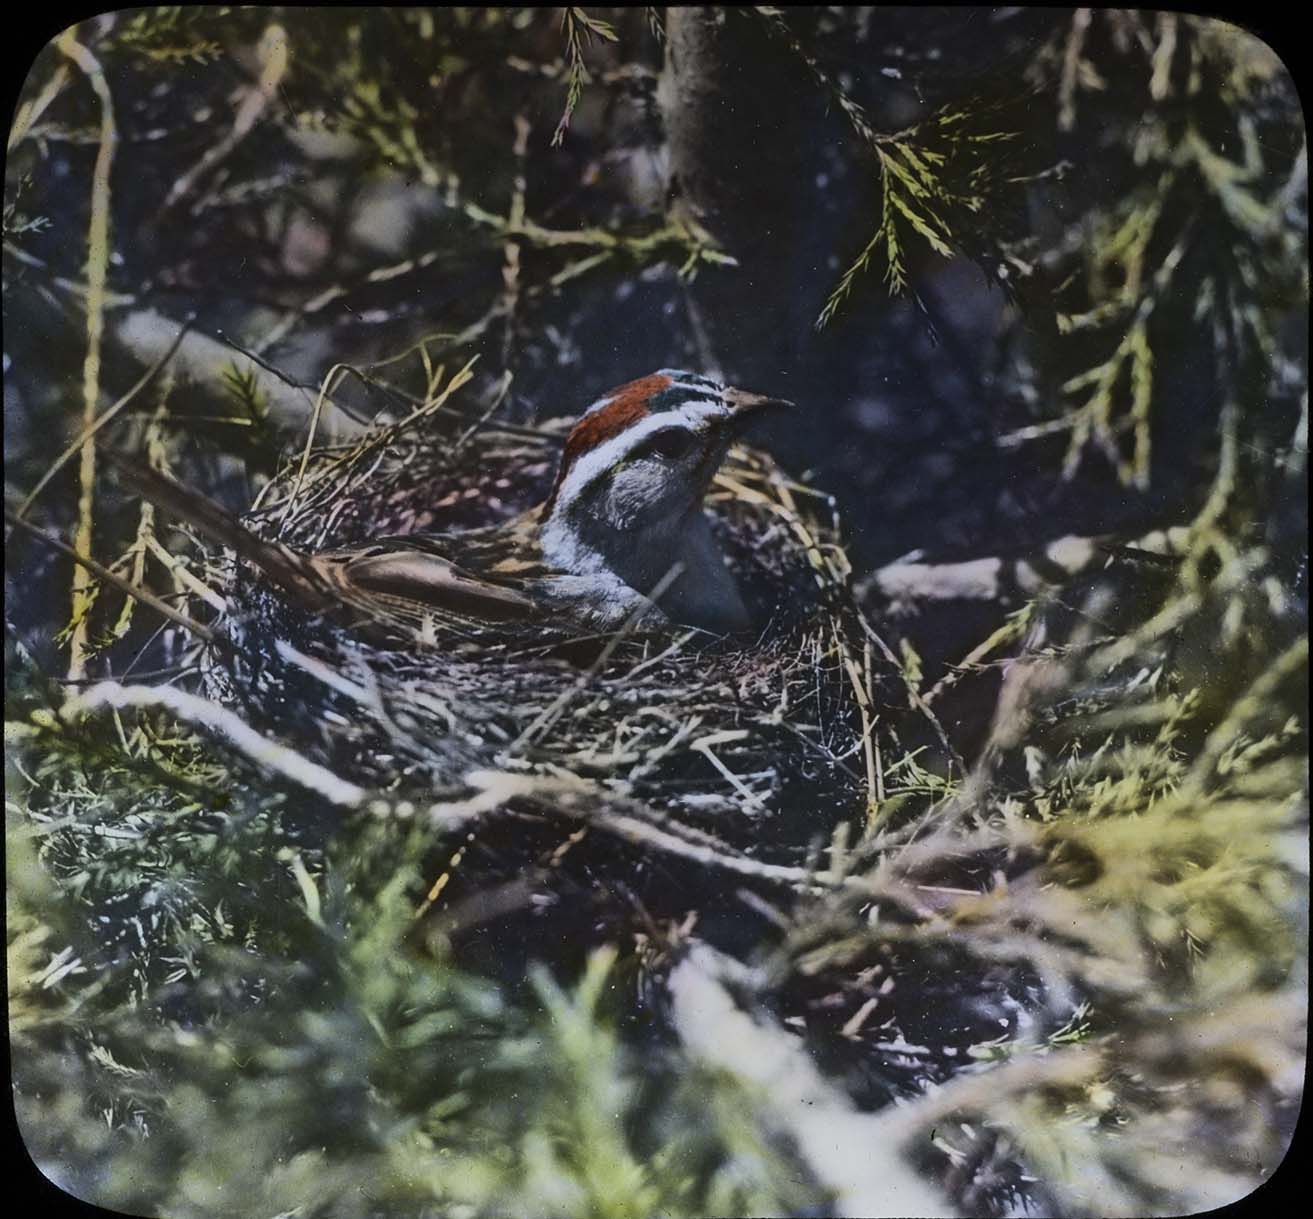 Lantern slide and photograph of a Chipping Sparrow on her nest